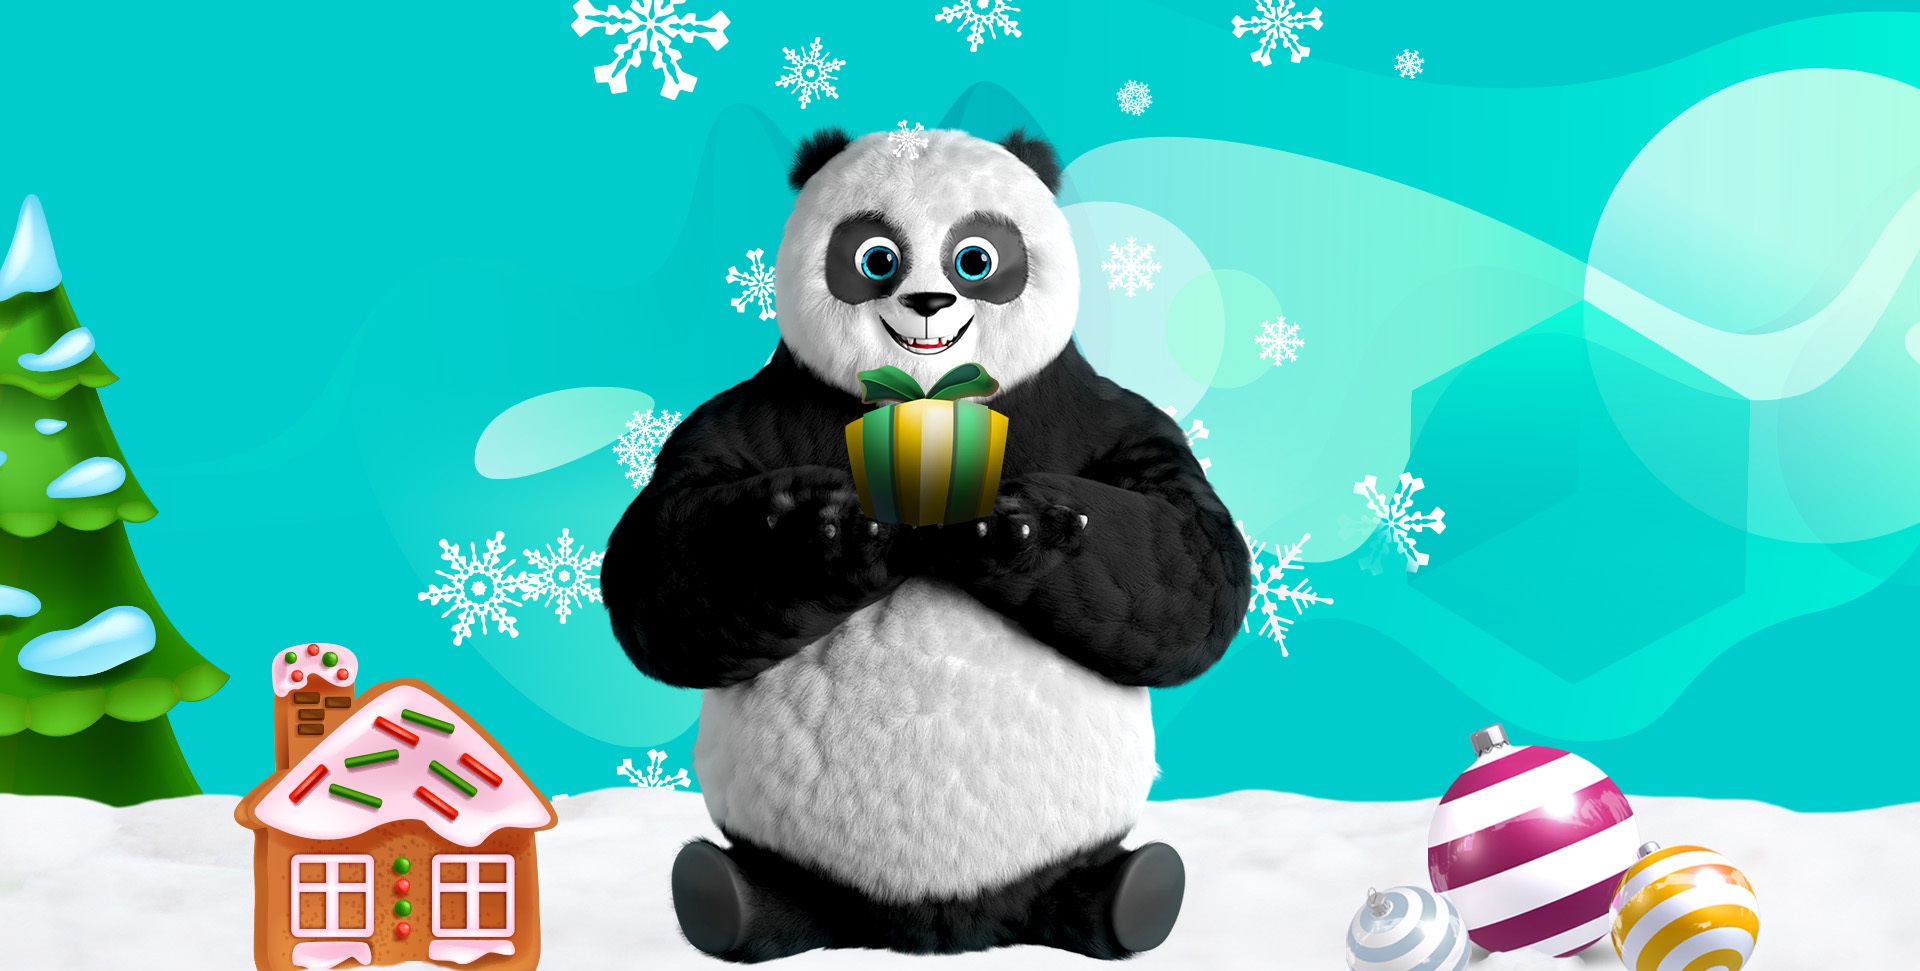 A cartoon panda holding a green and gold gift box, sitting on top of white snow.